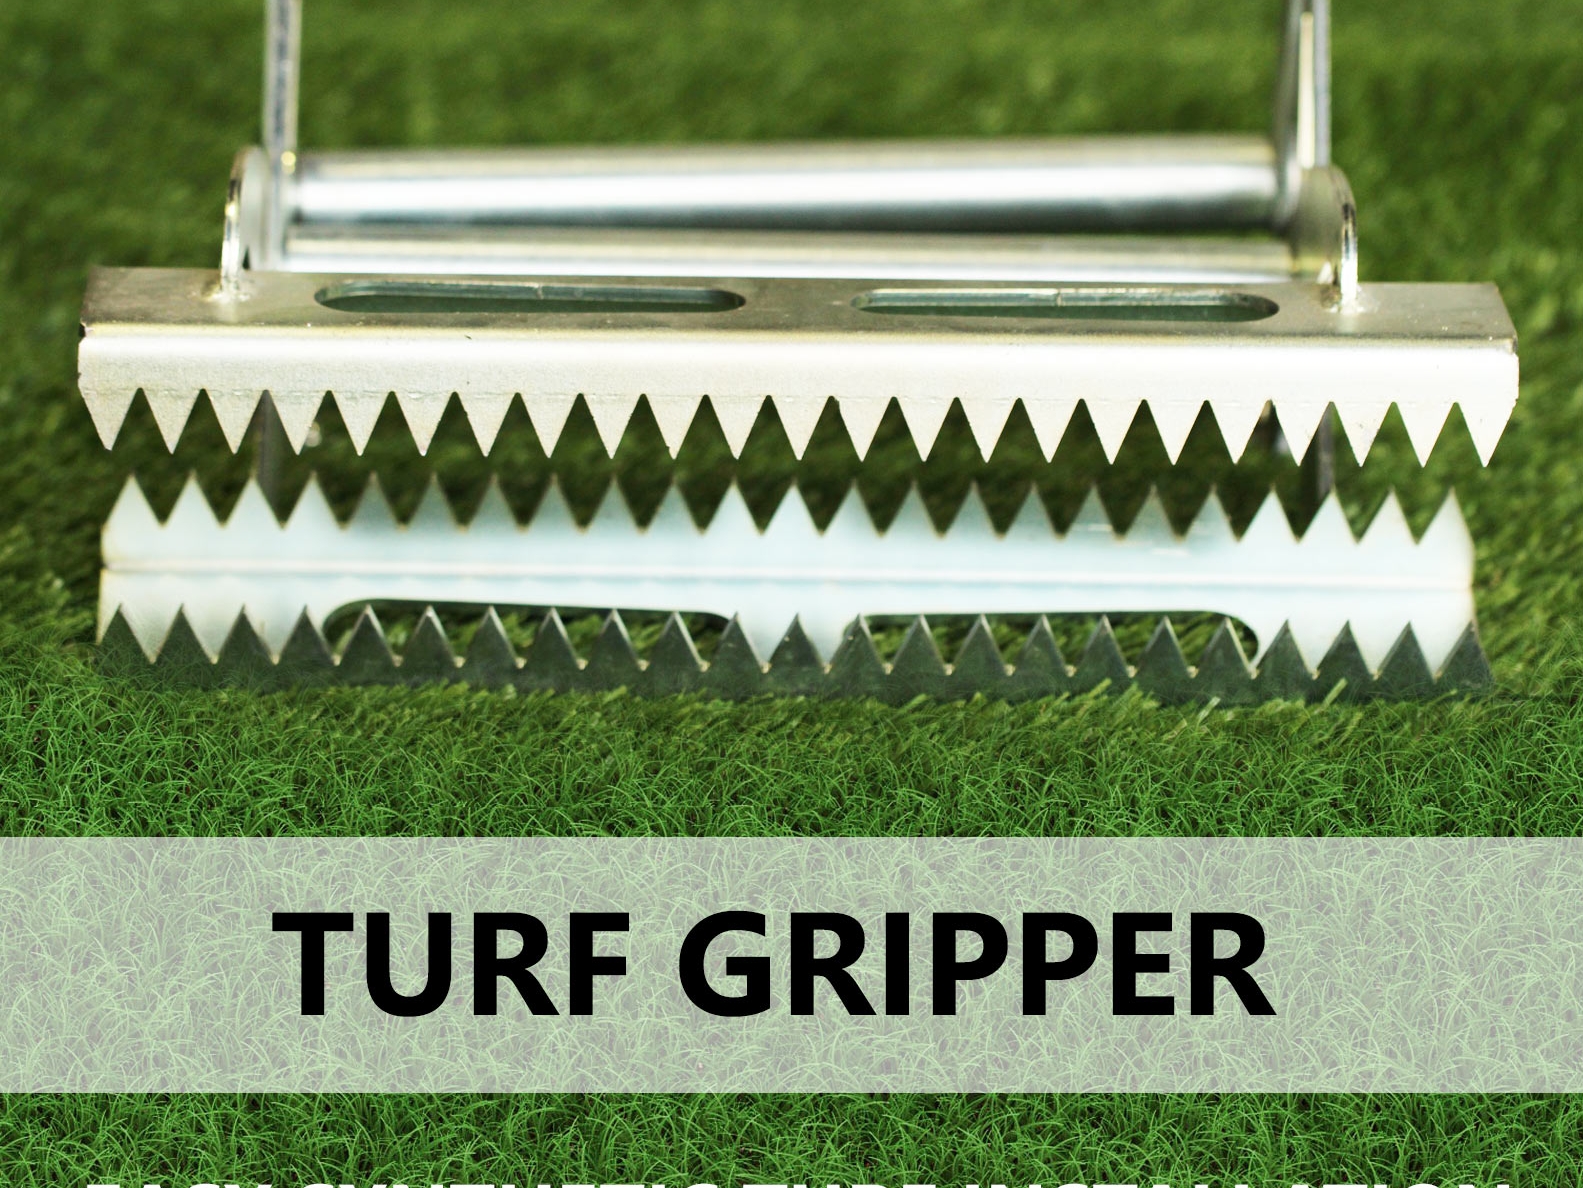 Turf Gripper - tools to make artificial grass installation easy